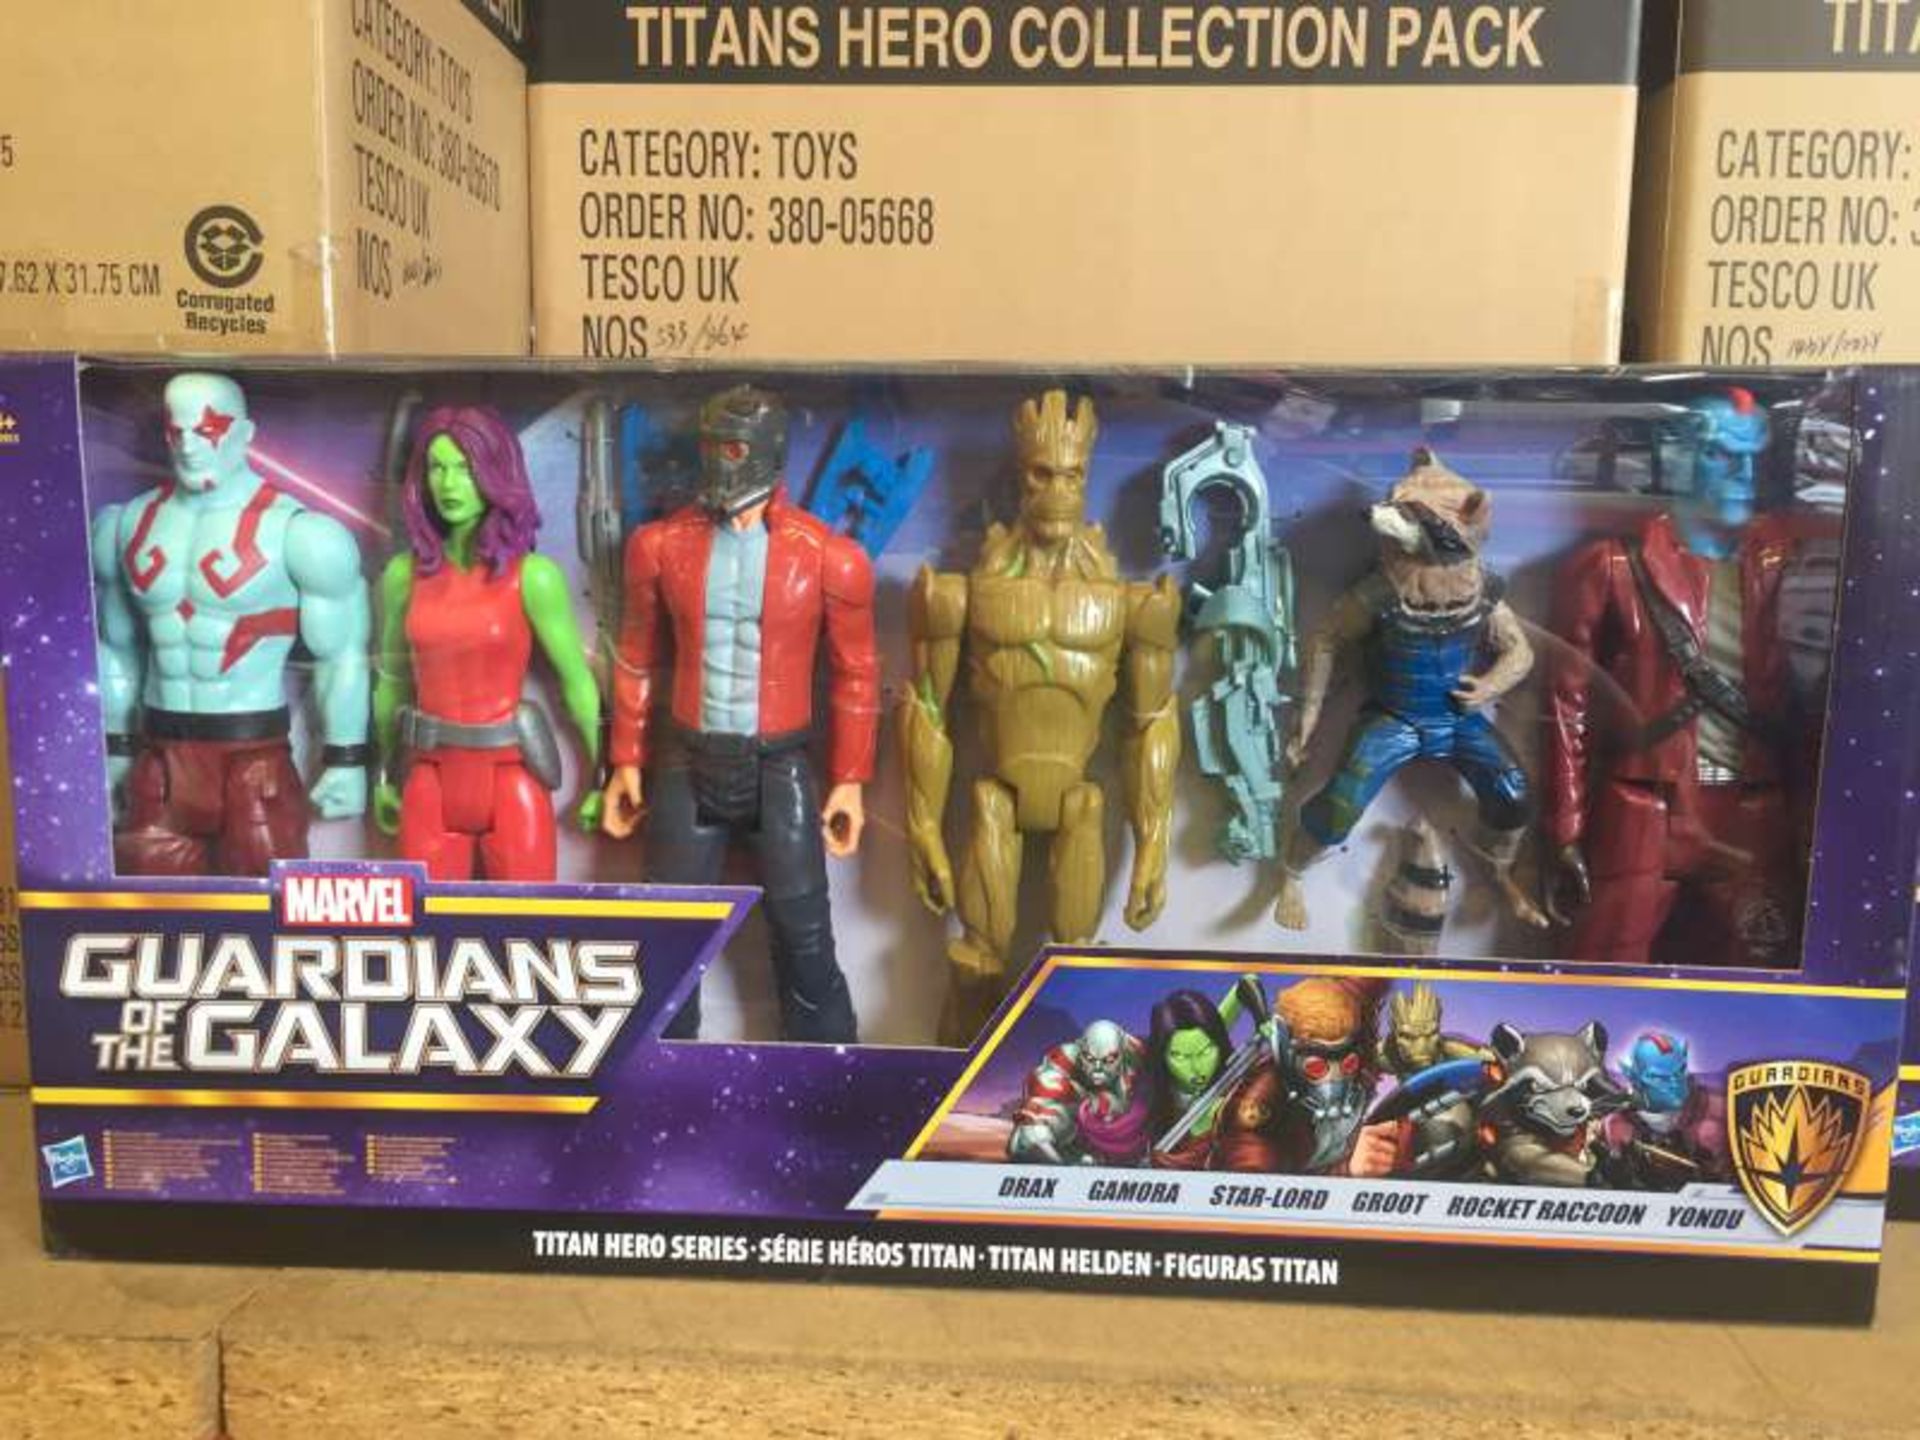 8 X BRAND NEW BOXED 6 PIECE MARVEL GUARDIANS OF THE GALAXY FIGURE SETS IN 2 BOXES